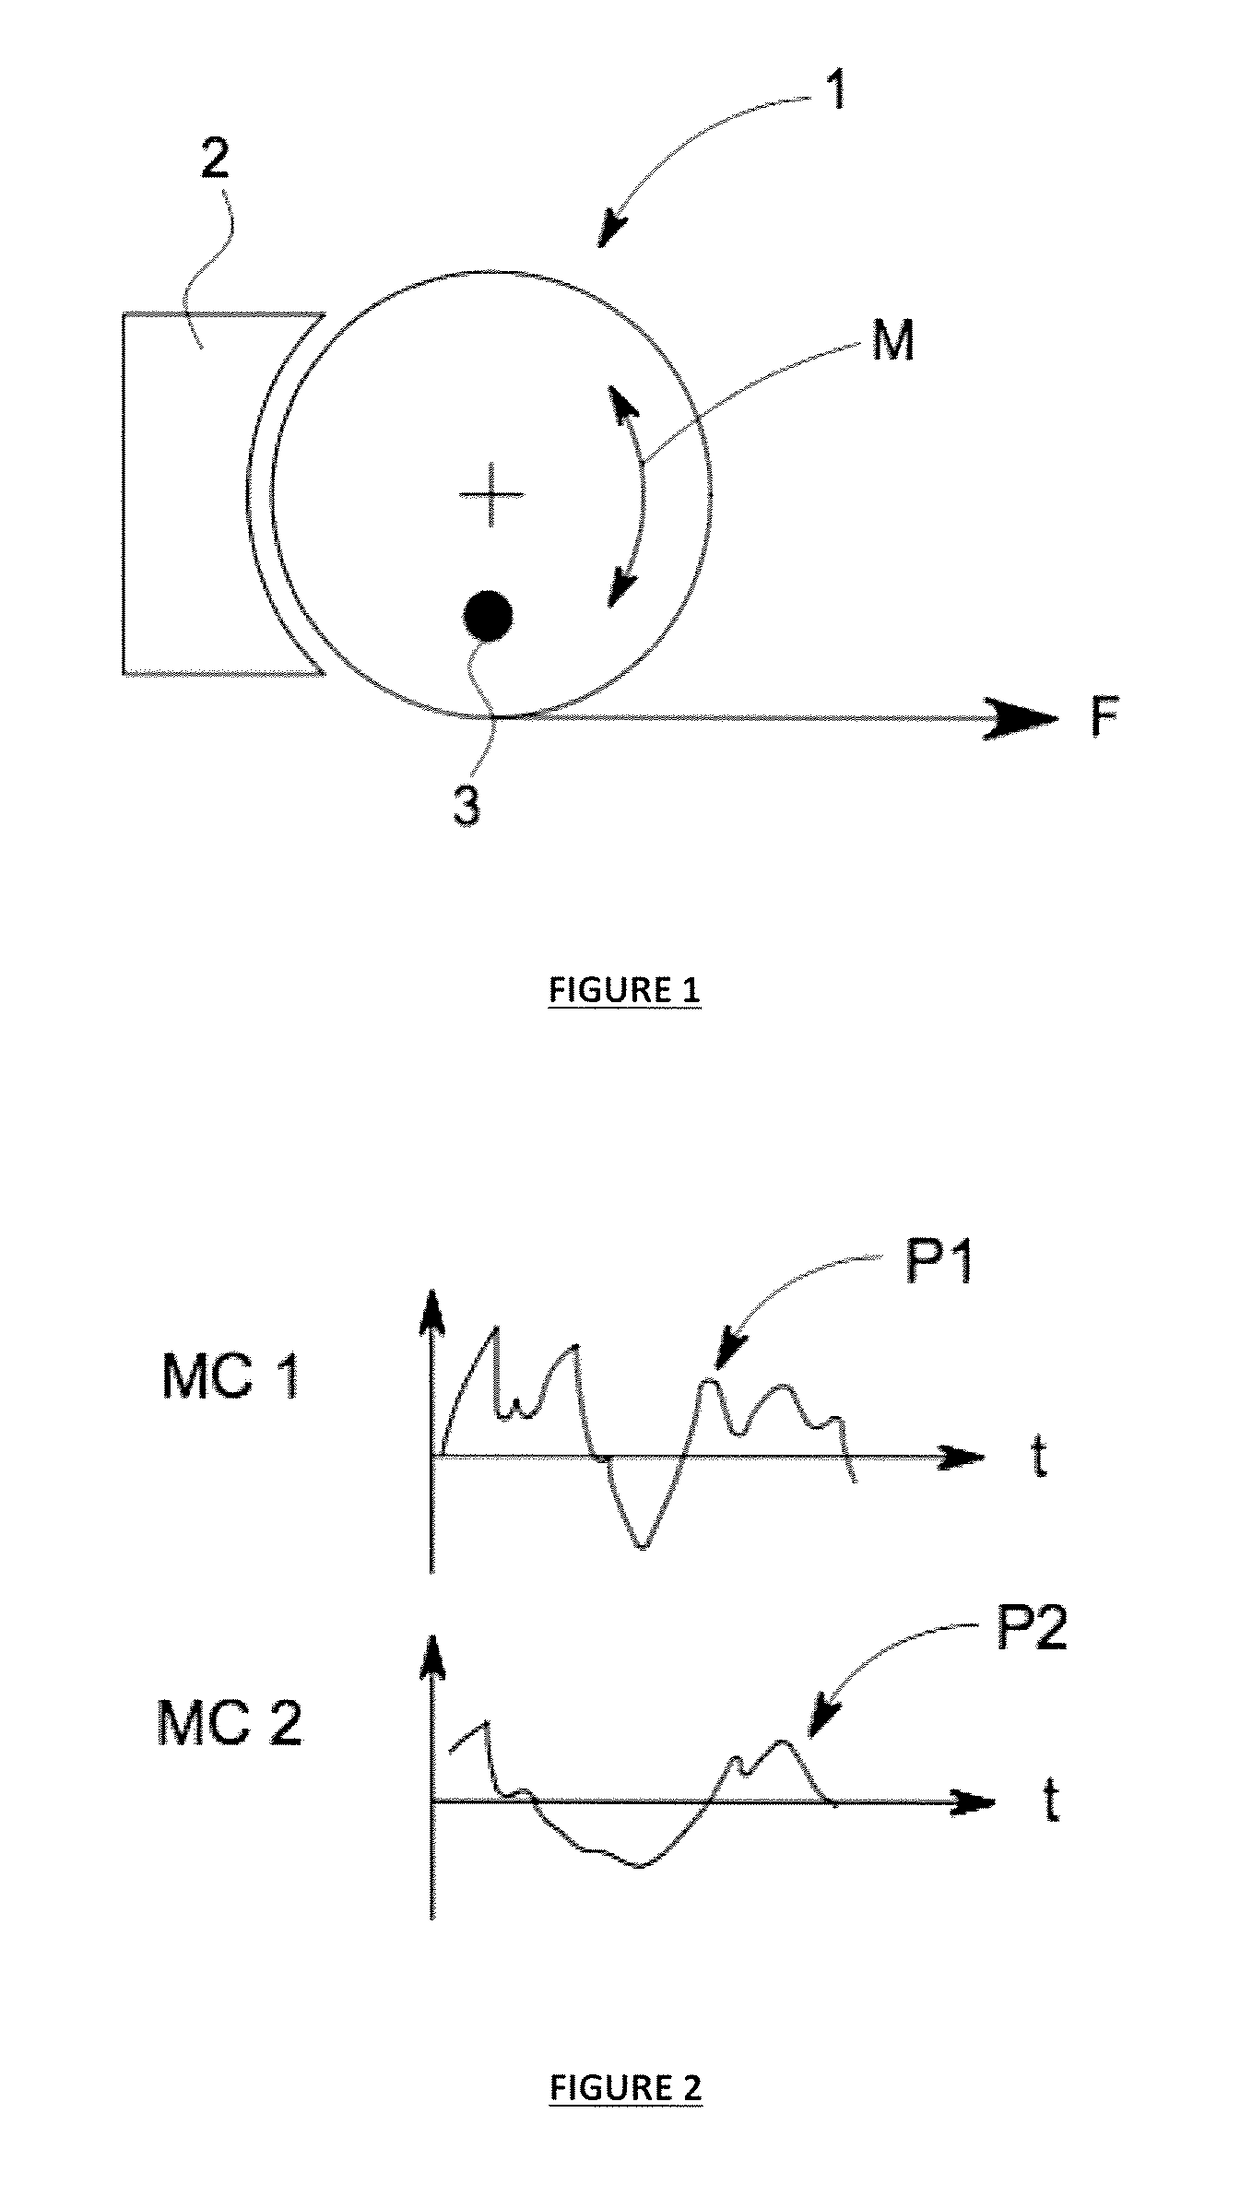 A variable behavior control mechanism for a motive system